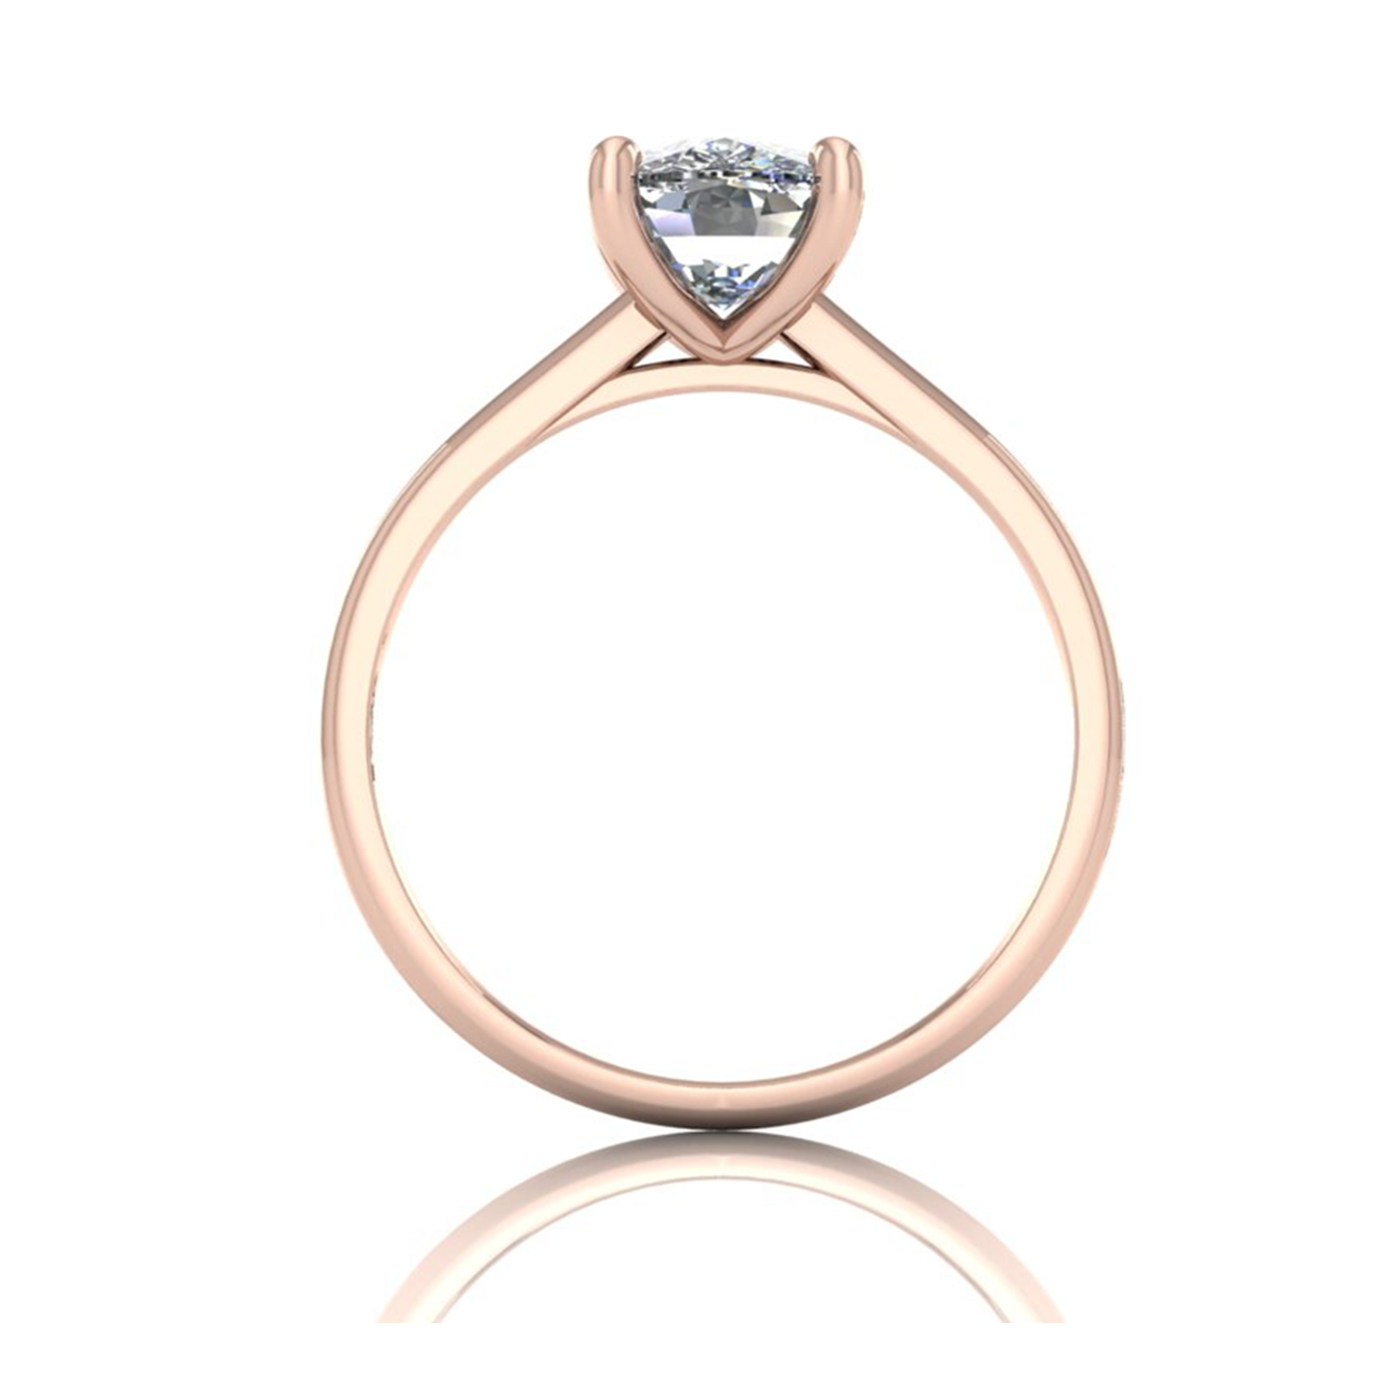 18k rose gold  2.50 ct 4 prongs solitaire elongated cushion cut diamond engagement ring with whisper thin band